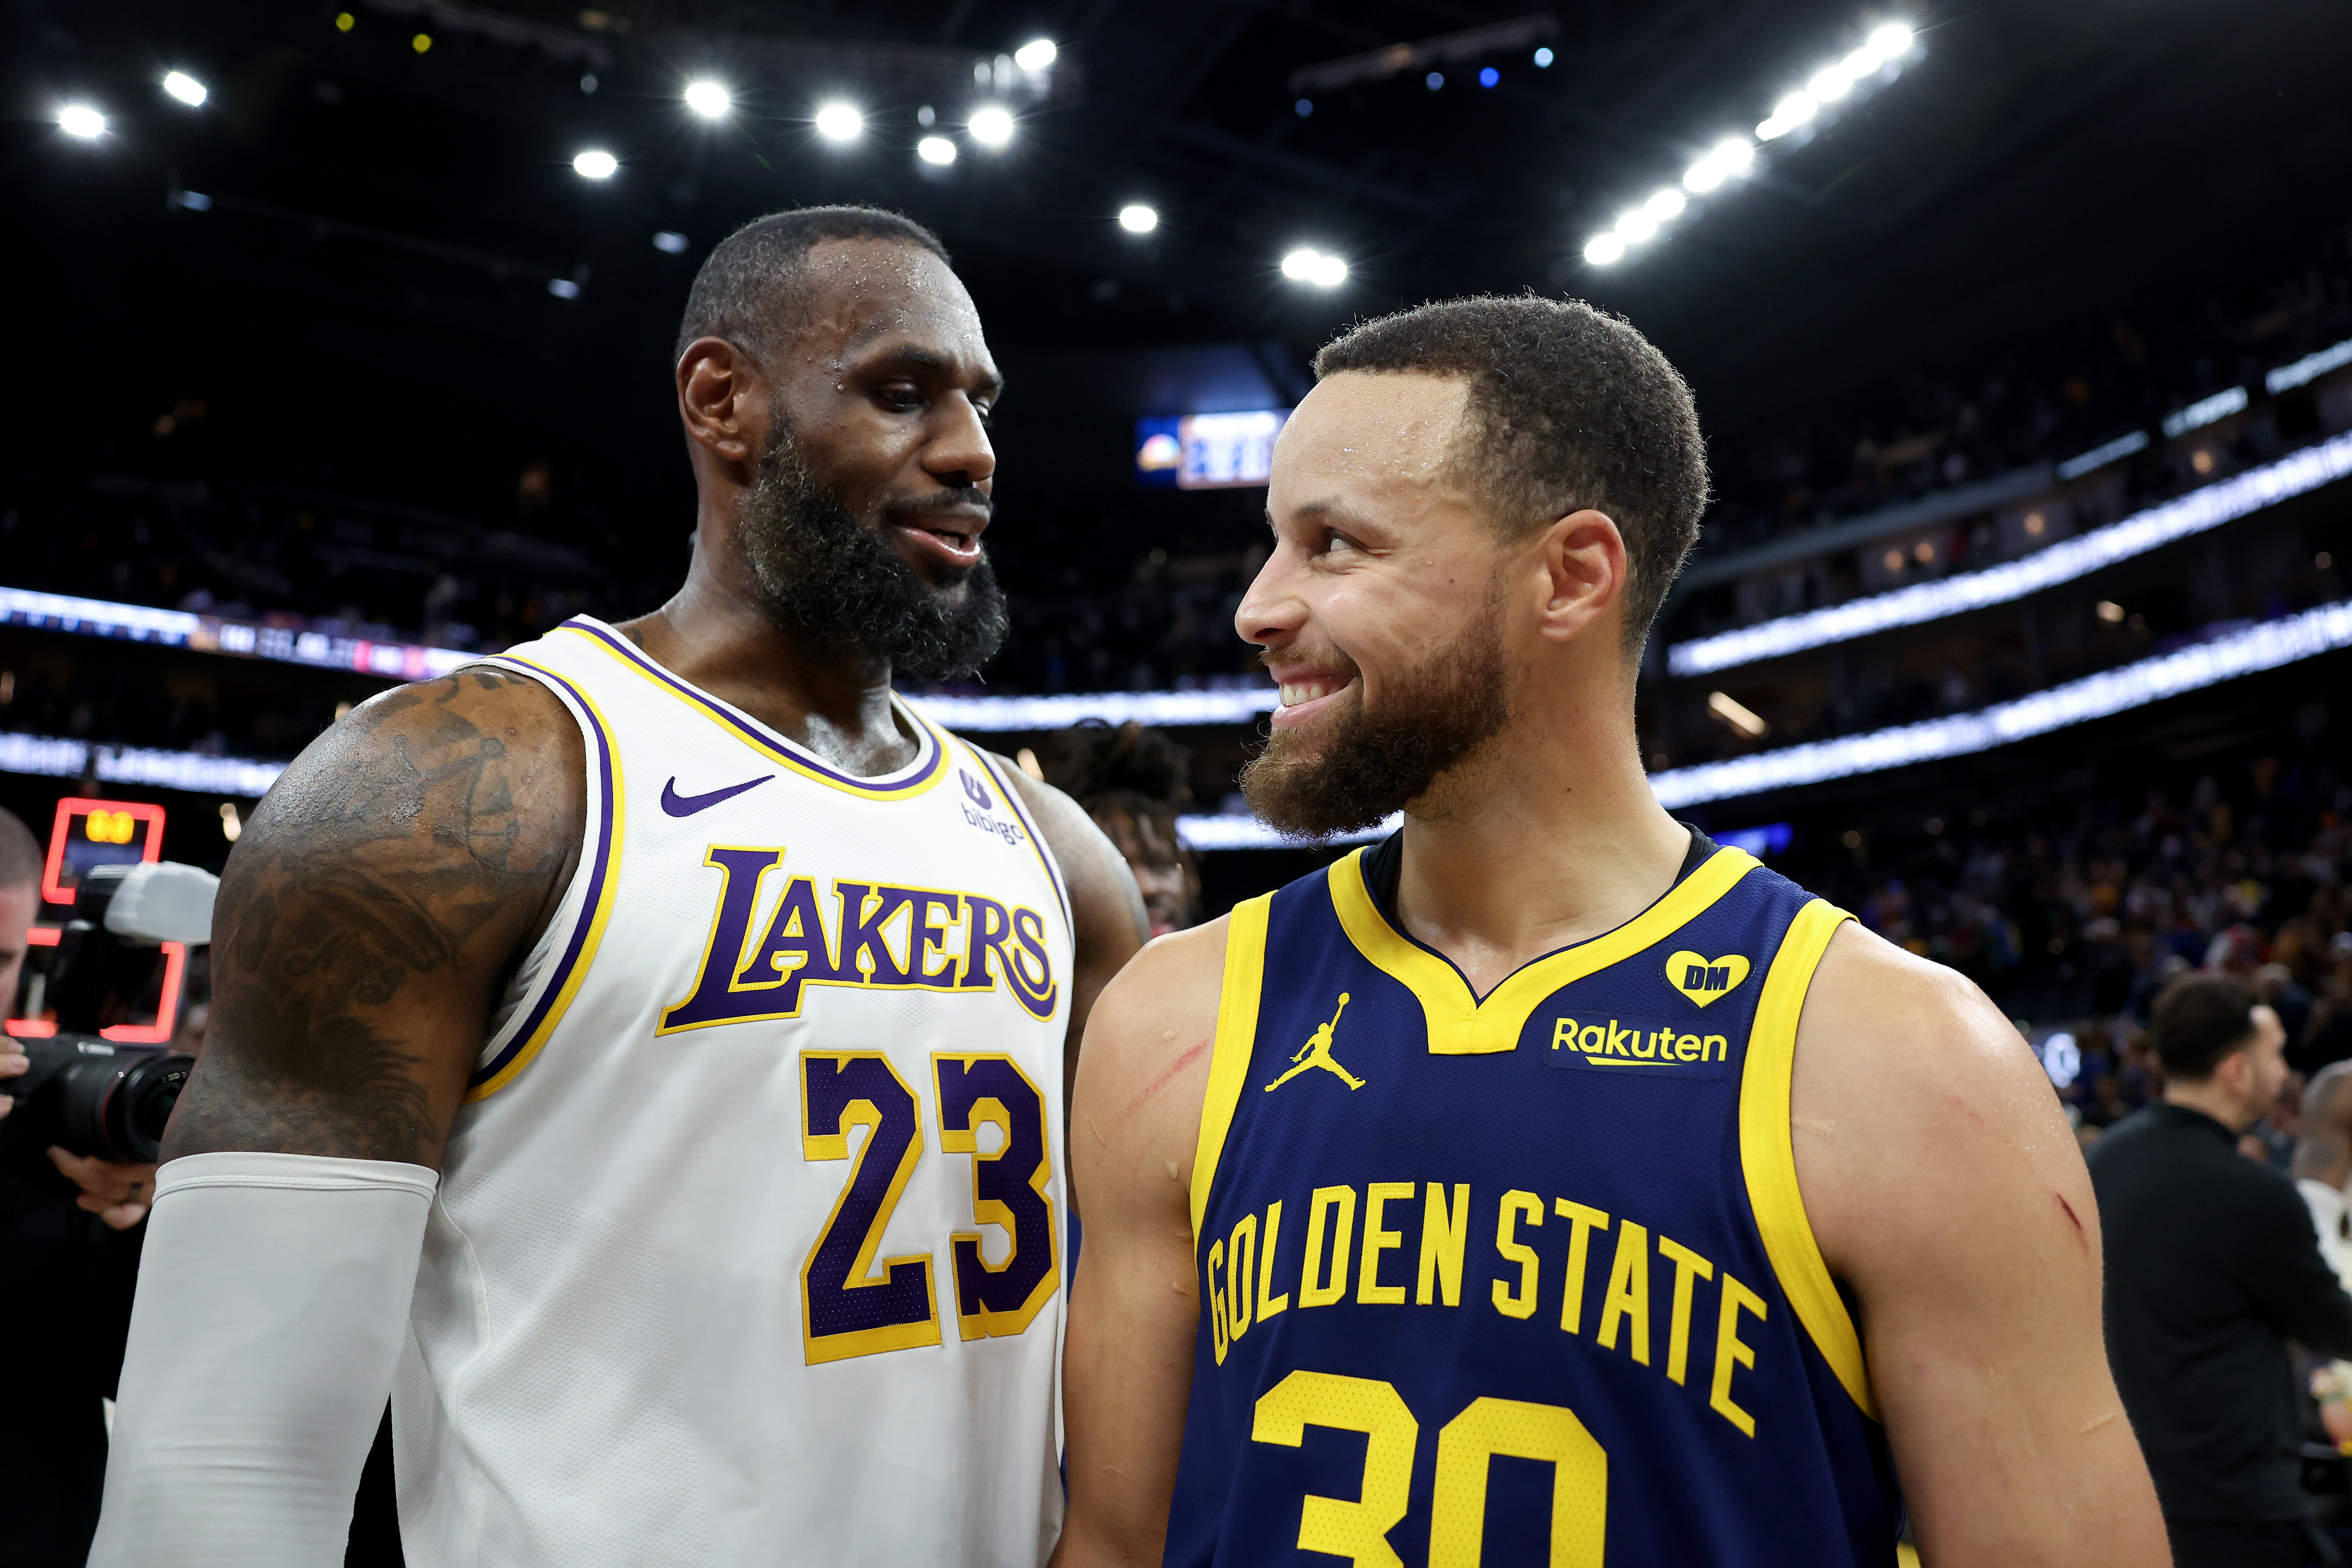 Lillard named LeBron James and Stephen Curry as players he wants to play with